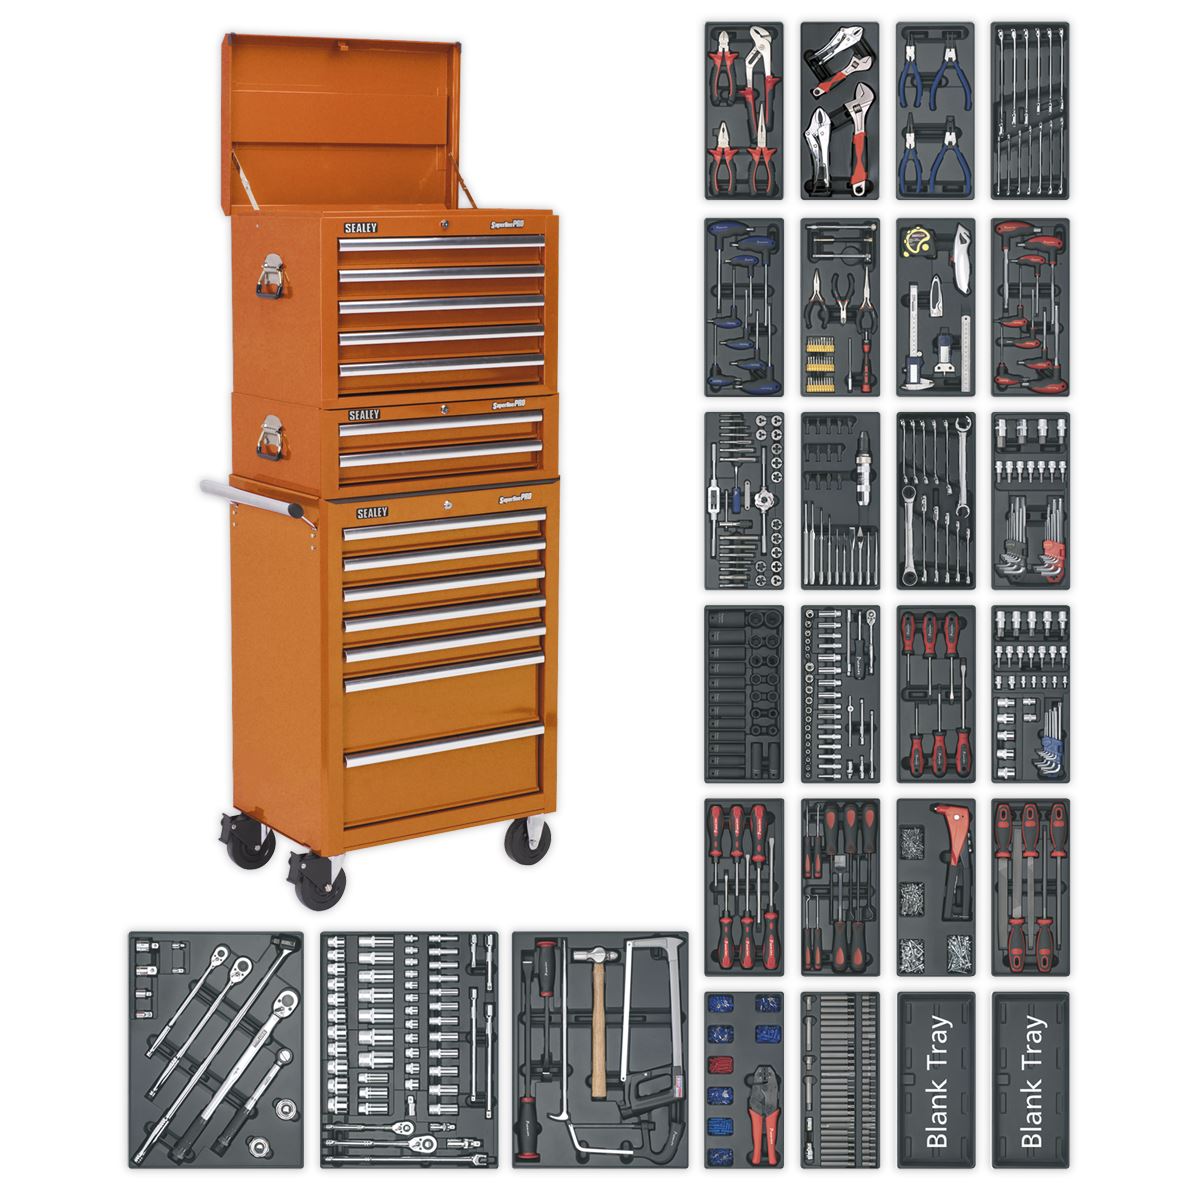 Sealey Superline Pro Tool Chest Combination 14 Drawer with Ball-Bearing Slides - Orange & 1179pc Tool Kit